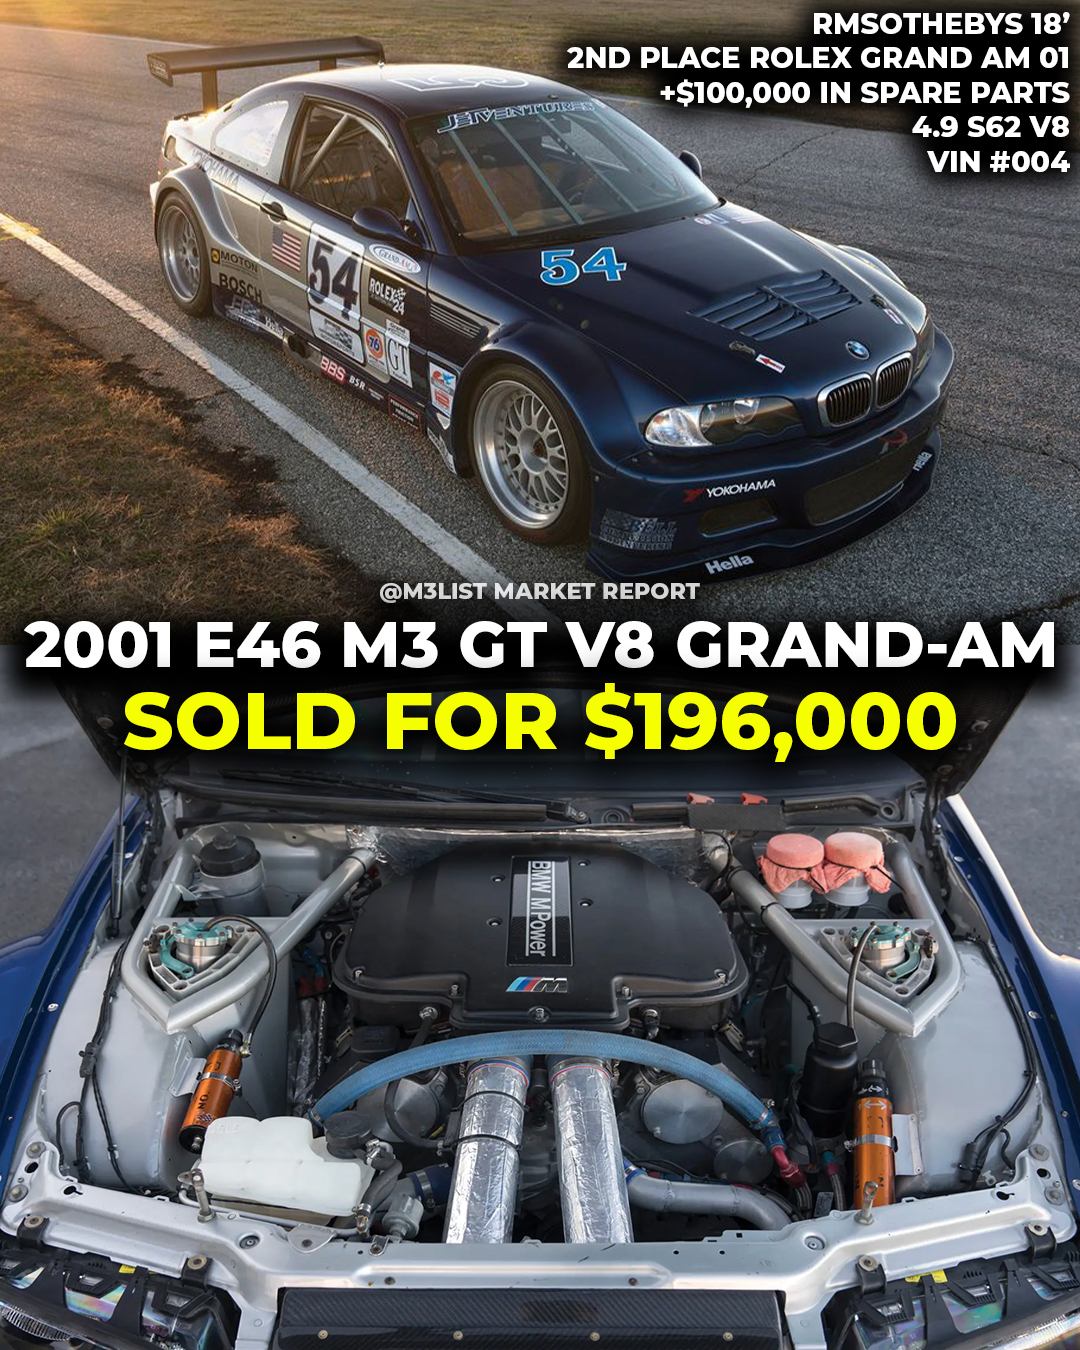 2001 BMW E46 M3 GT V8 Grand-am sold for $196,000!!